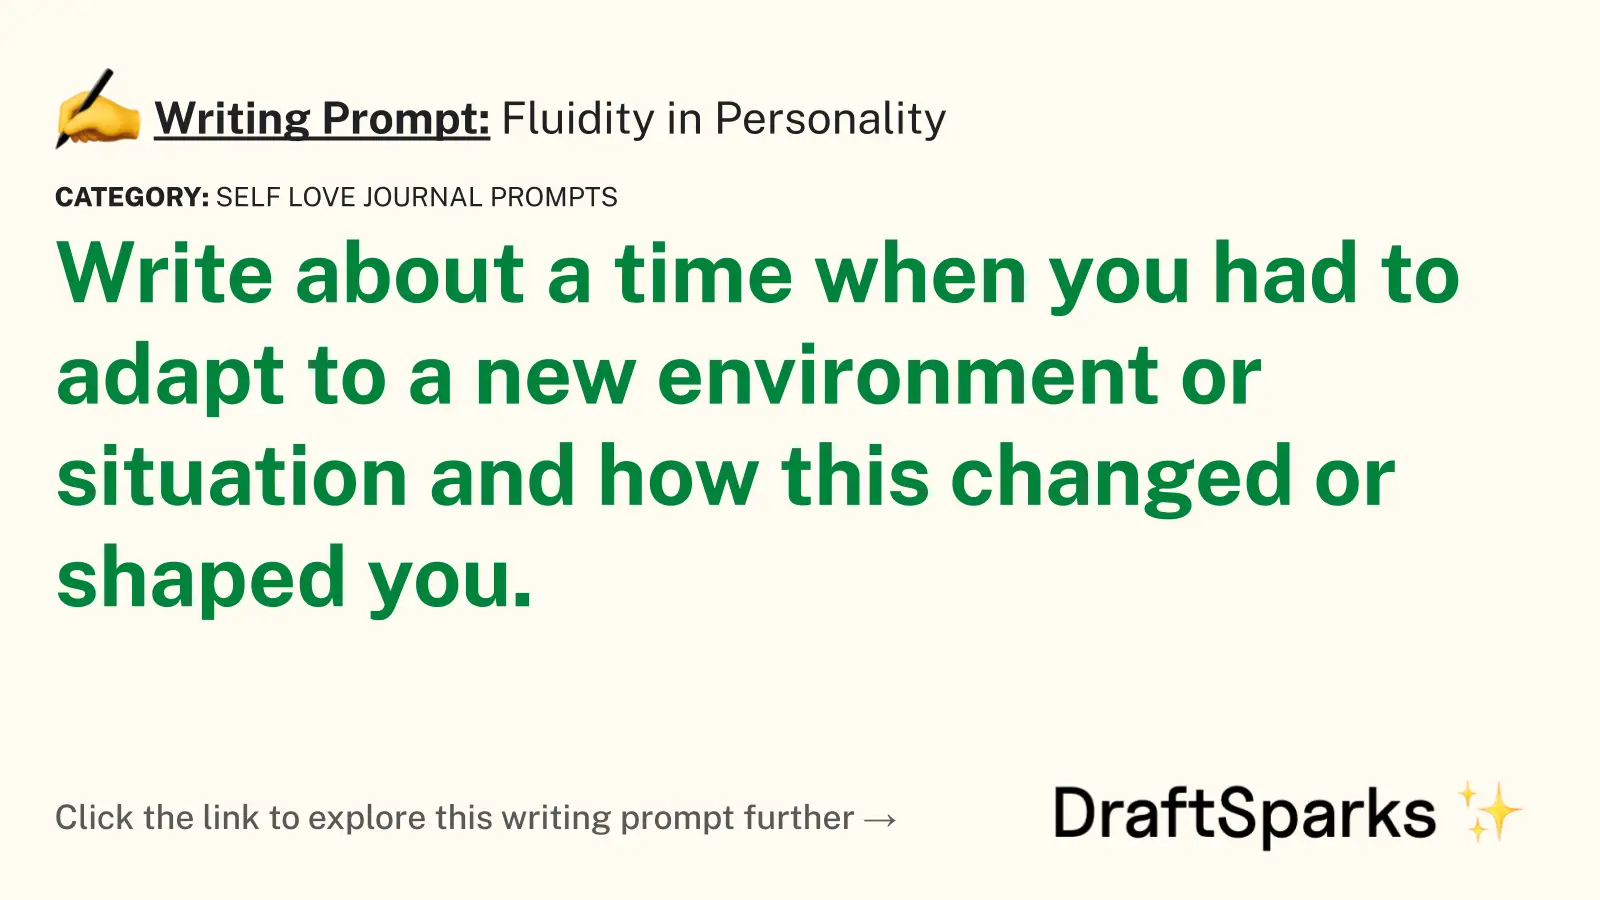 Fluidity in Personality